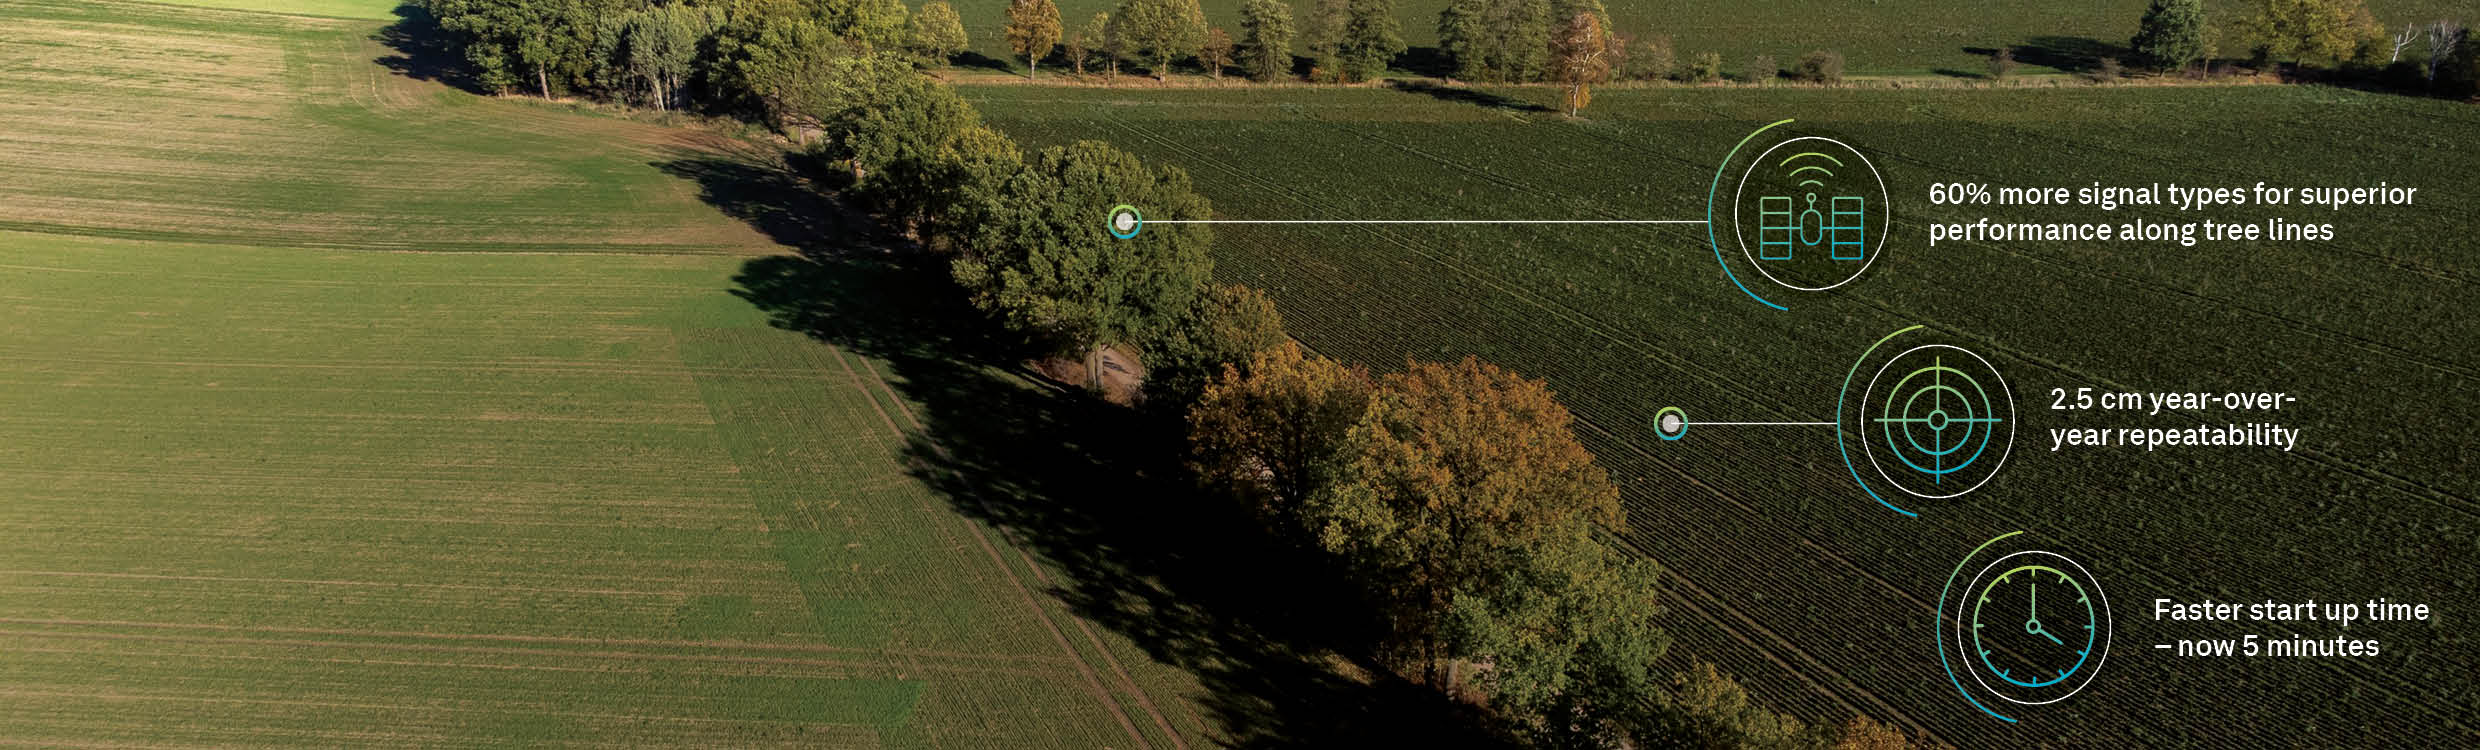 A road through a row of trees in a field. Callouts with icons are labeled "60% more signal types for superior performance along tree lines" "2.5 cm year-over-year repeatability" and "Faster start up time - now 5 min"